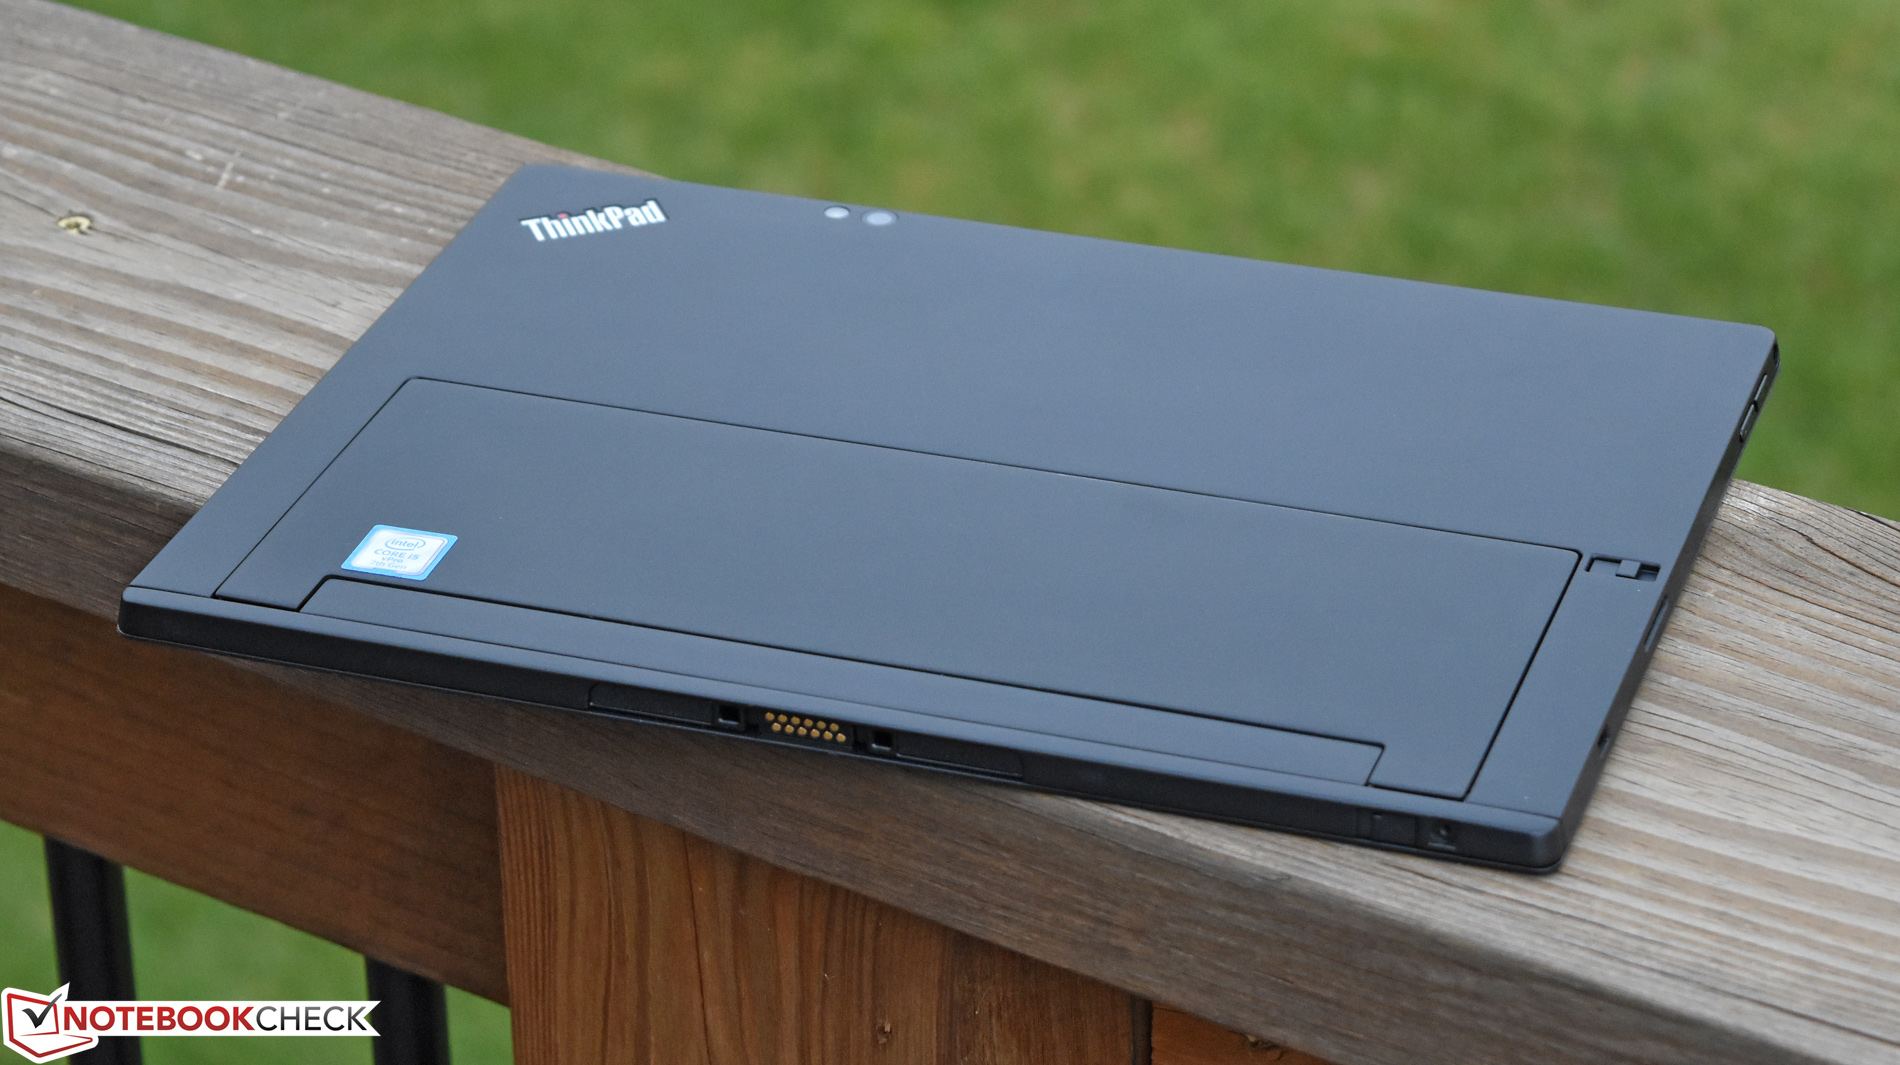 Lenovo Thinkpad X1 Tablet Gen 2 I5 7y54 Tablet Review Notebookcheck